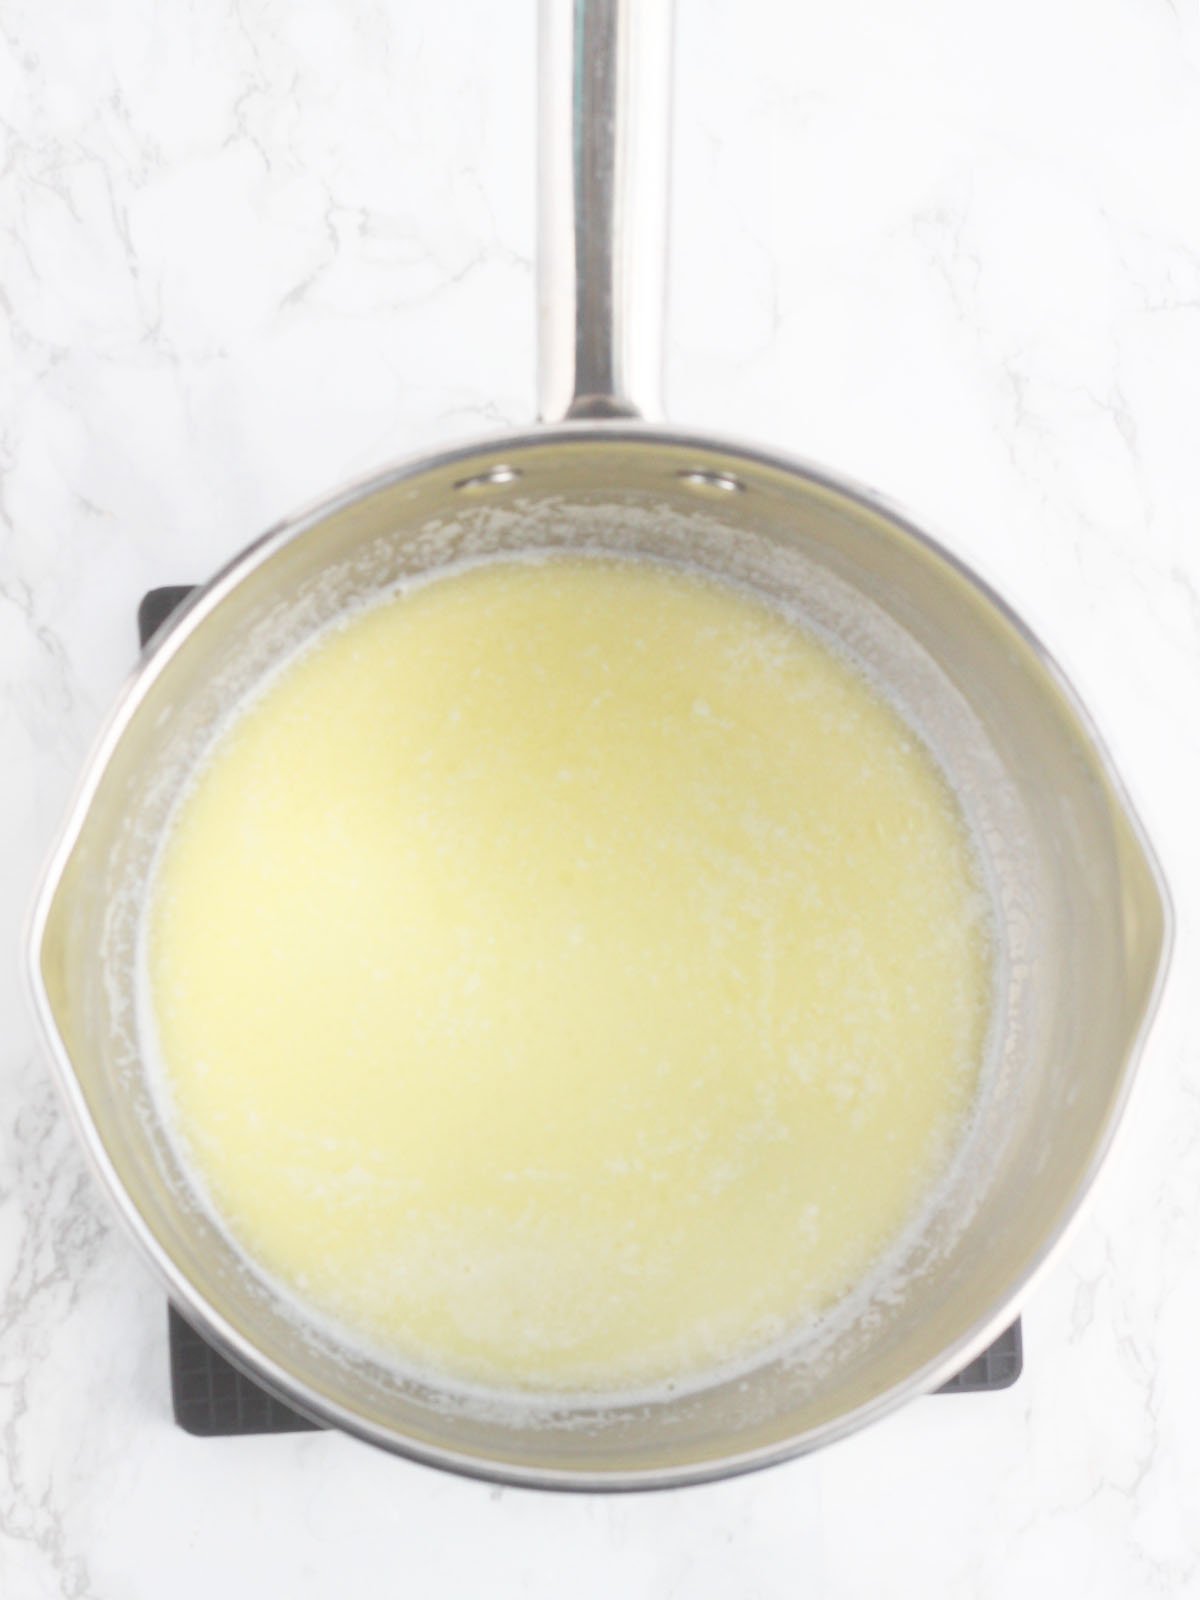 melted butter and warm milk in a metal pan